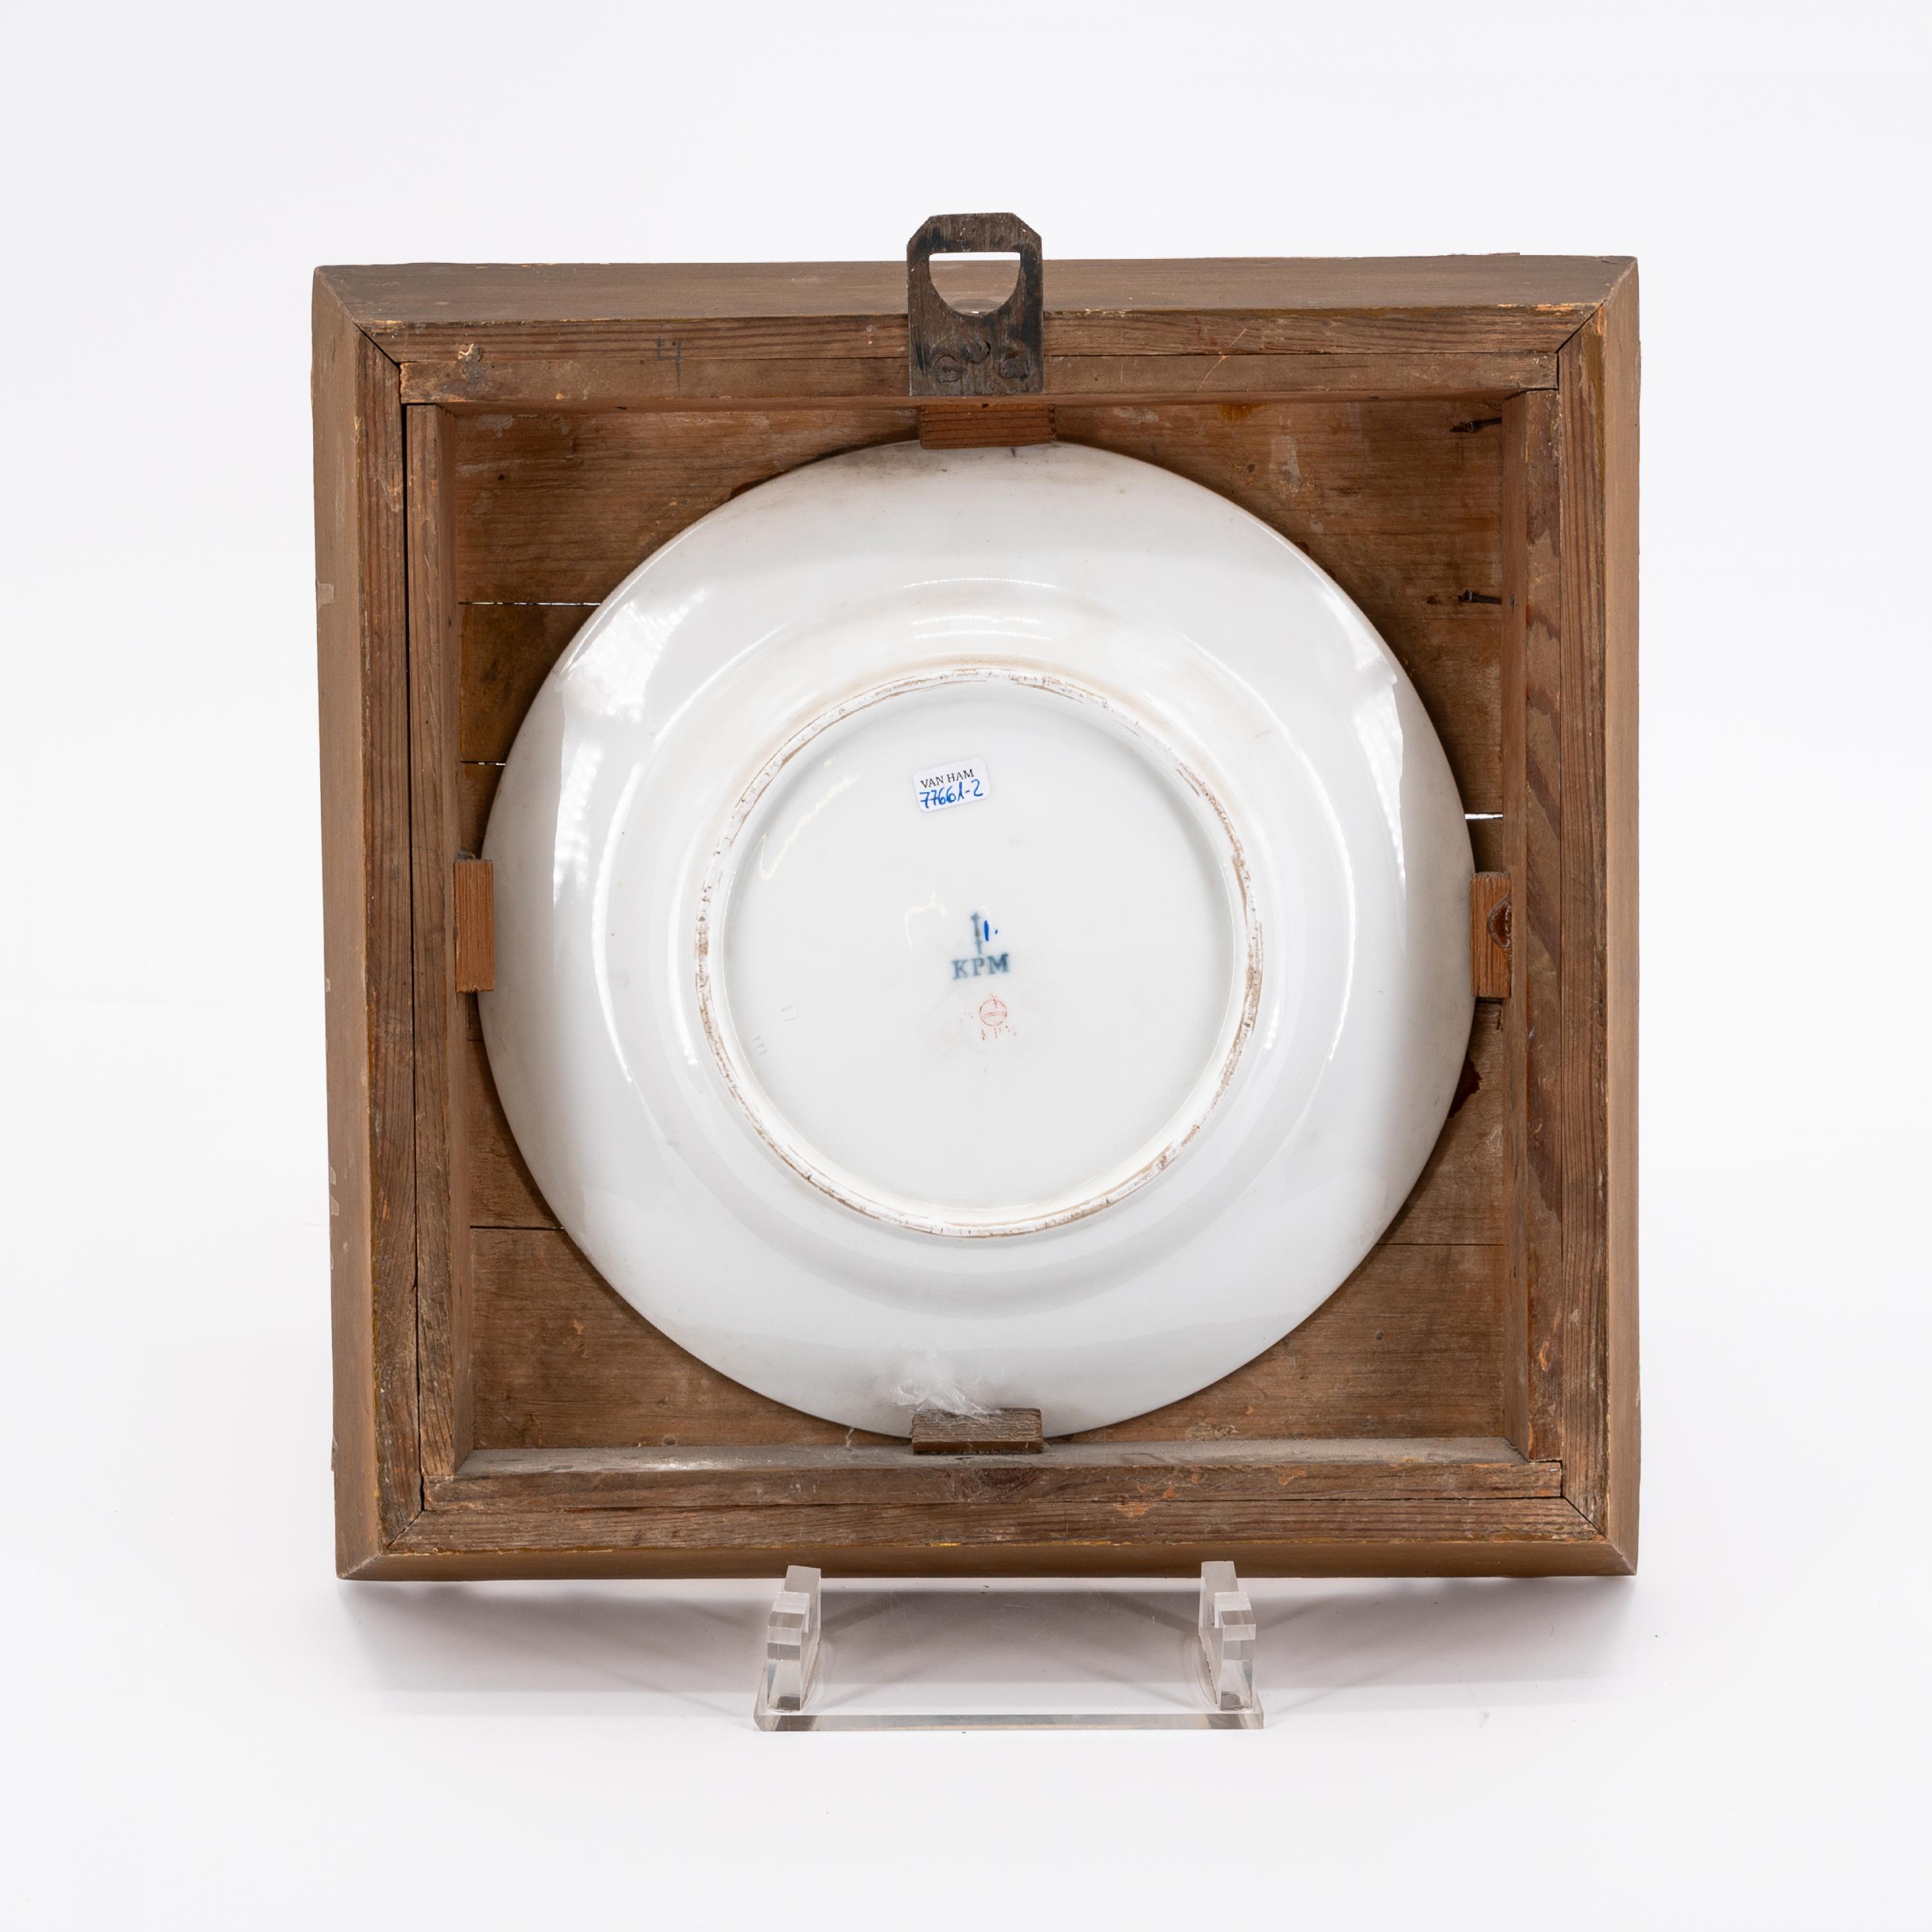 EXEPTIONAL SERIES OF TWELVE PORCELAIN PLATES WITH ROMANTIC VIEWS OF THE RHINE - Image 22 of 26